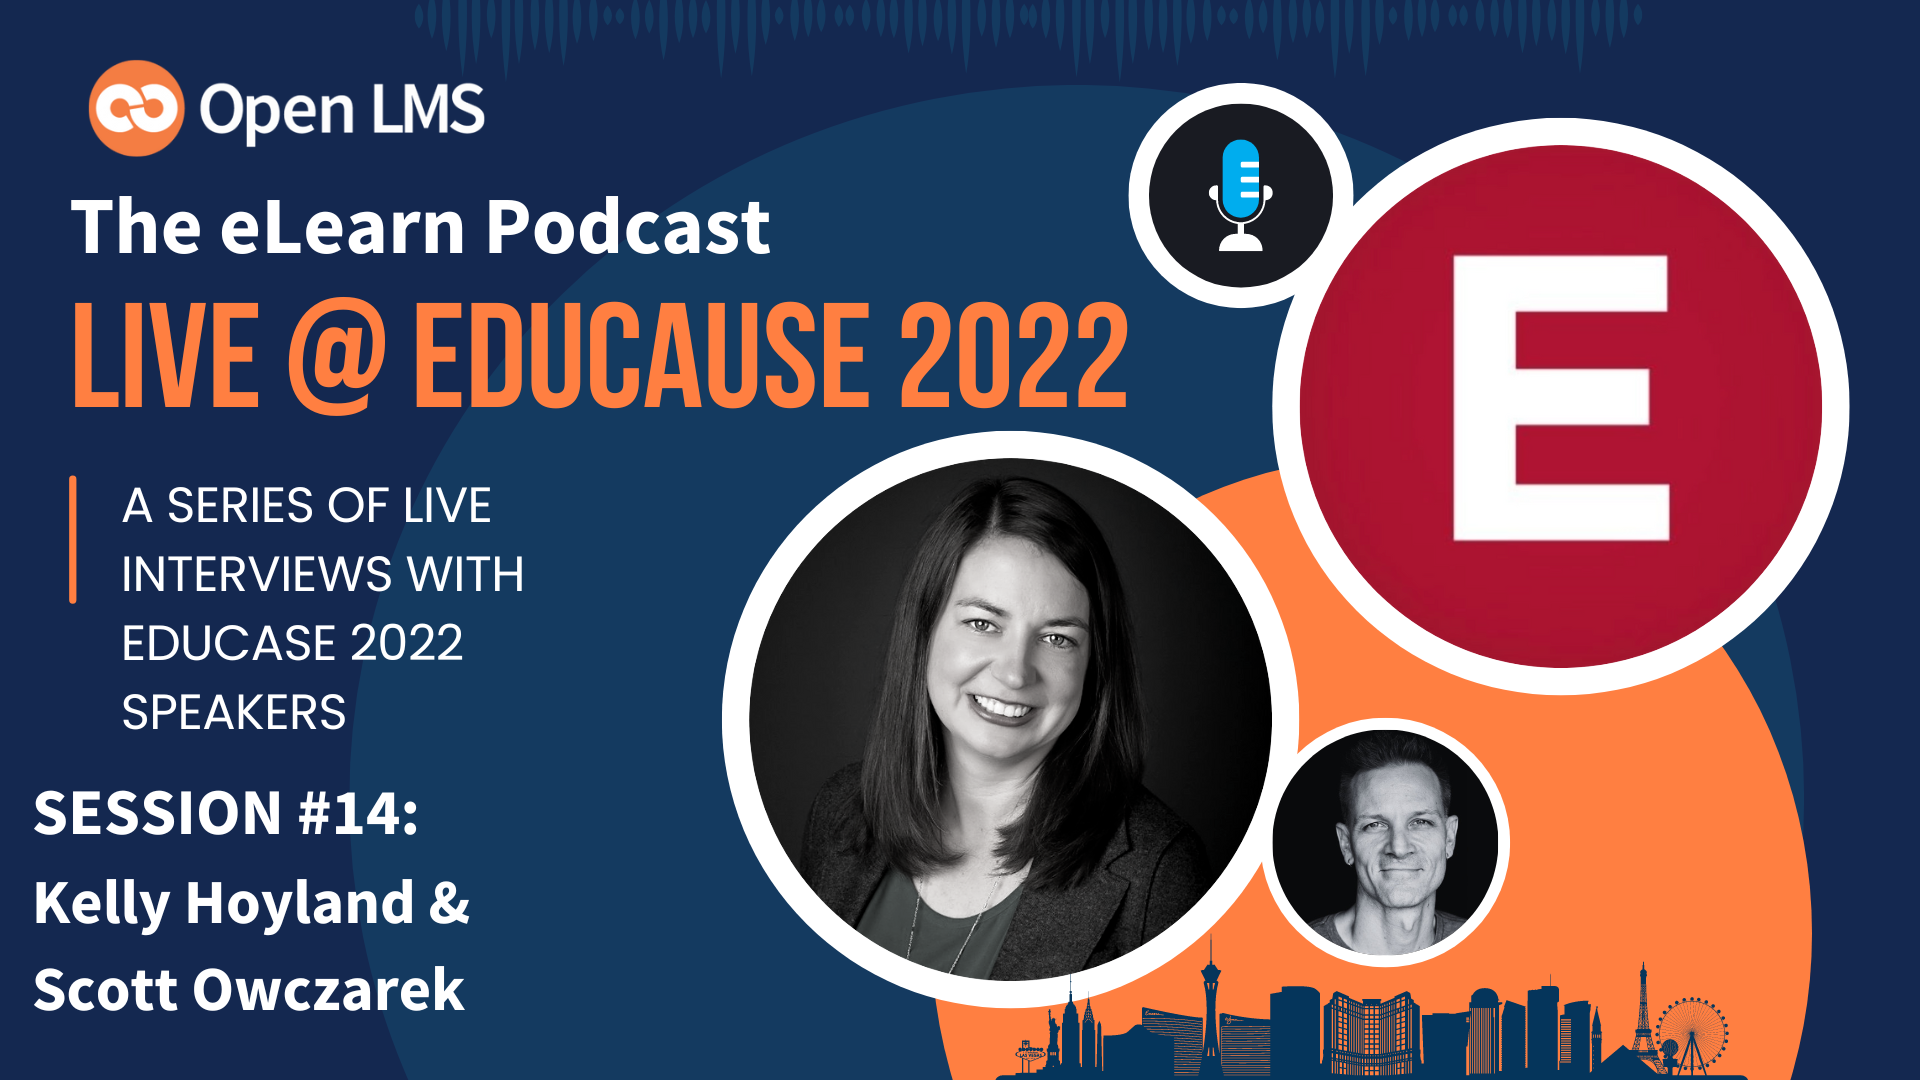 EDUCAUSE Experts Recap 2022! eLearning Experts Plot Today's Issues—And The Answers For 2023